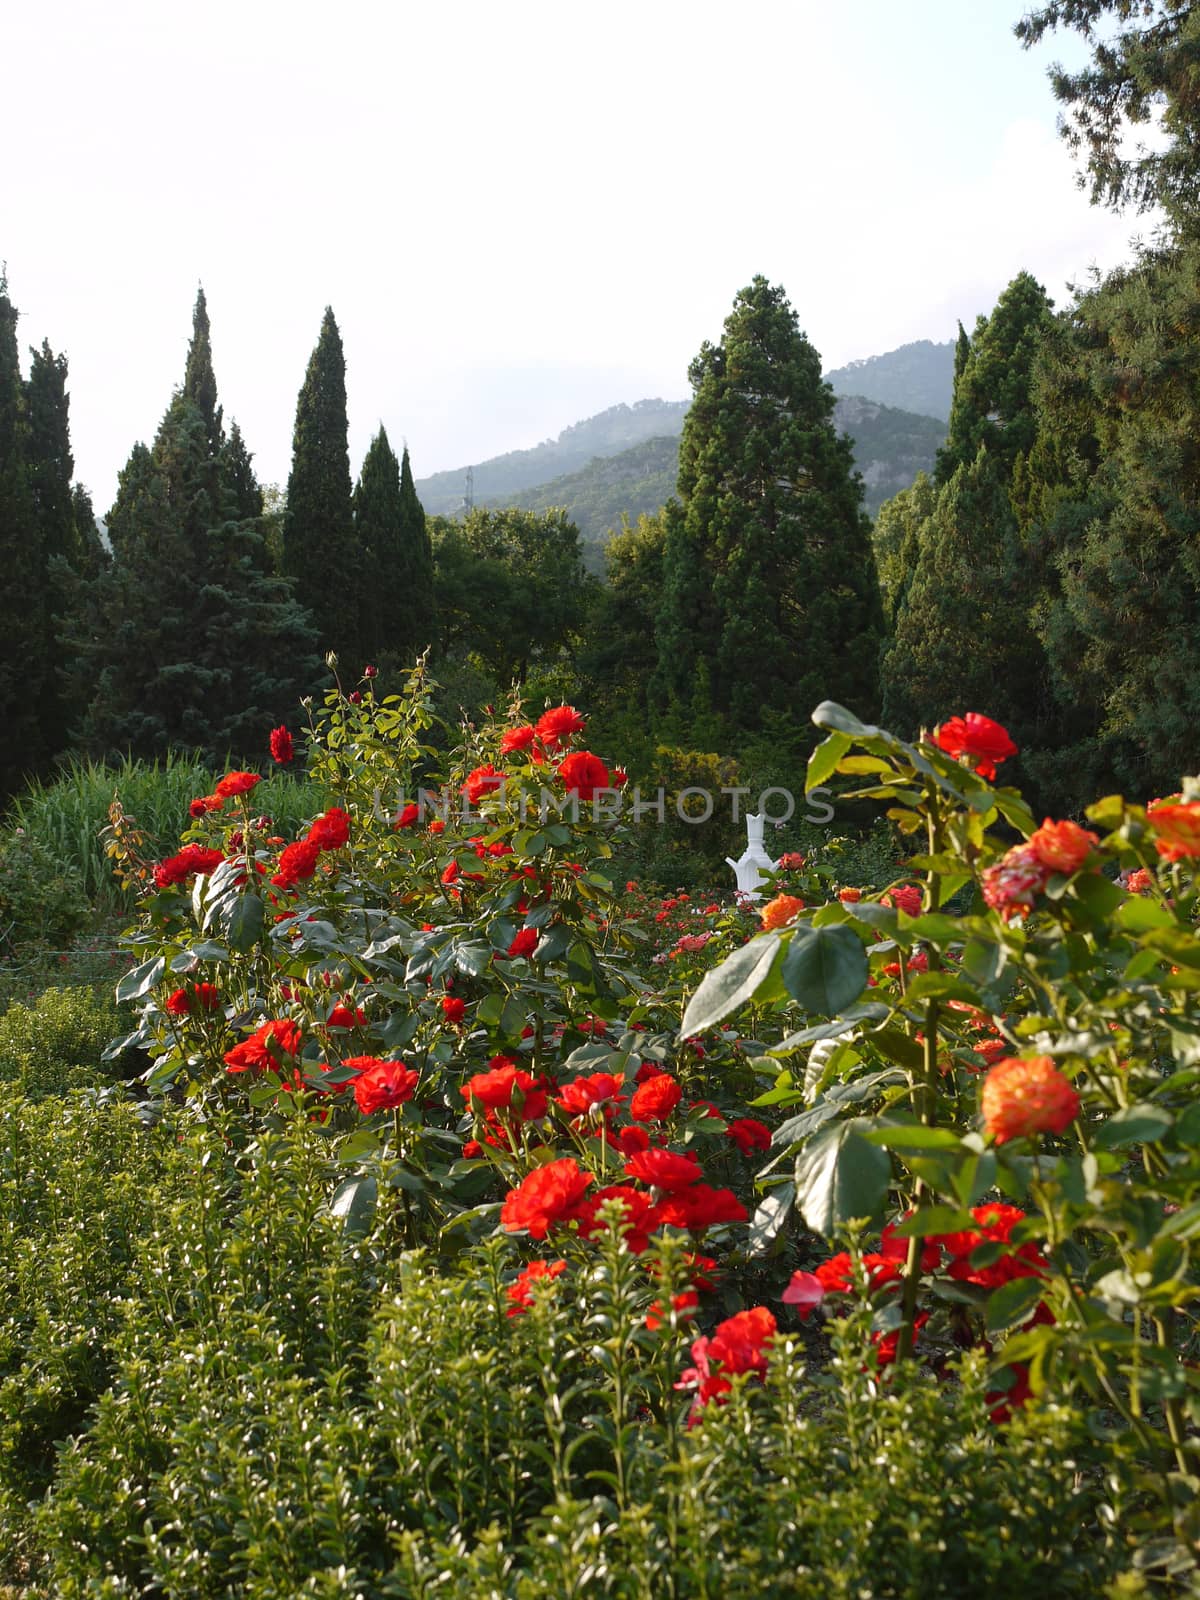 Shrubs with lush, red roses on tops against the background of coniferous trees by Adamchuk